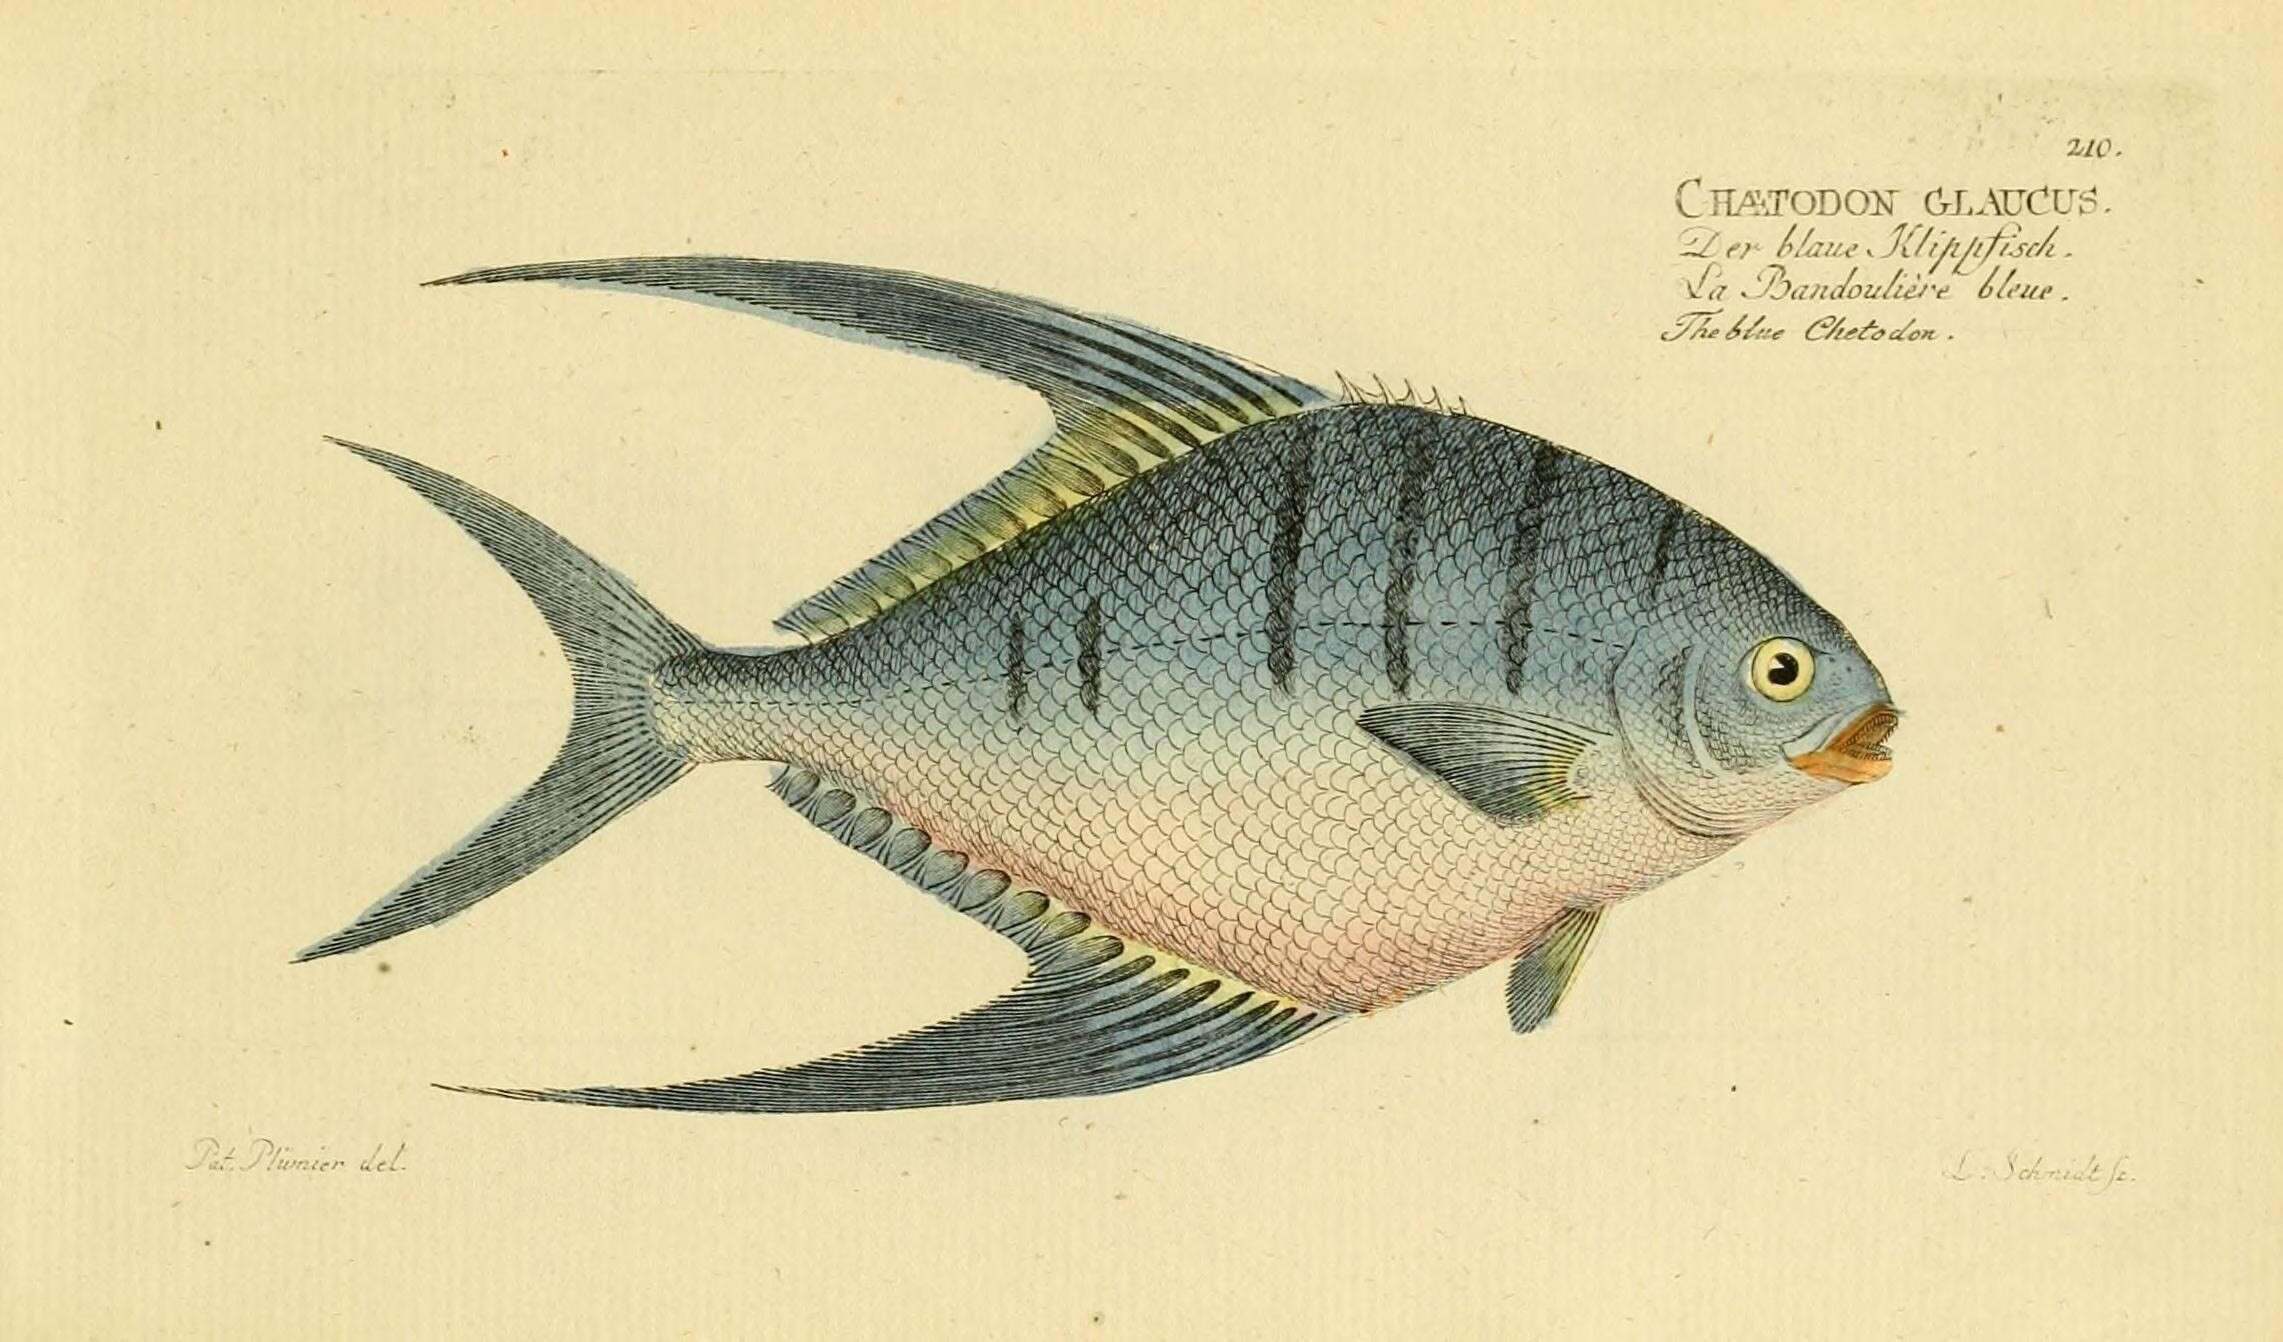 Image of Chaetodon glaucus